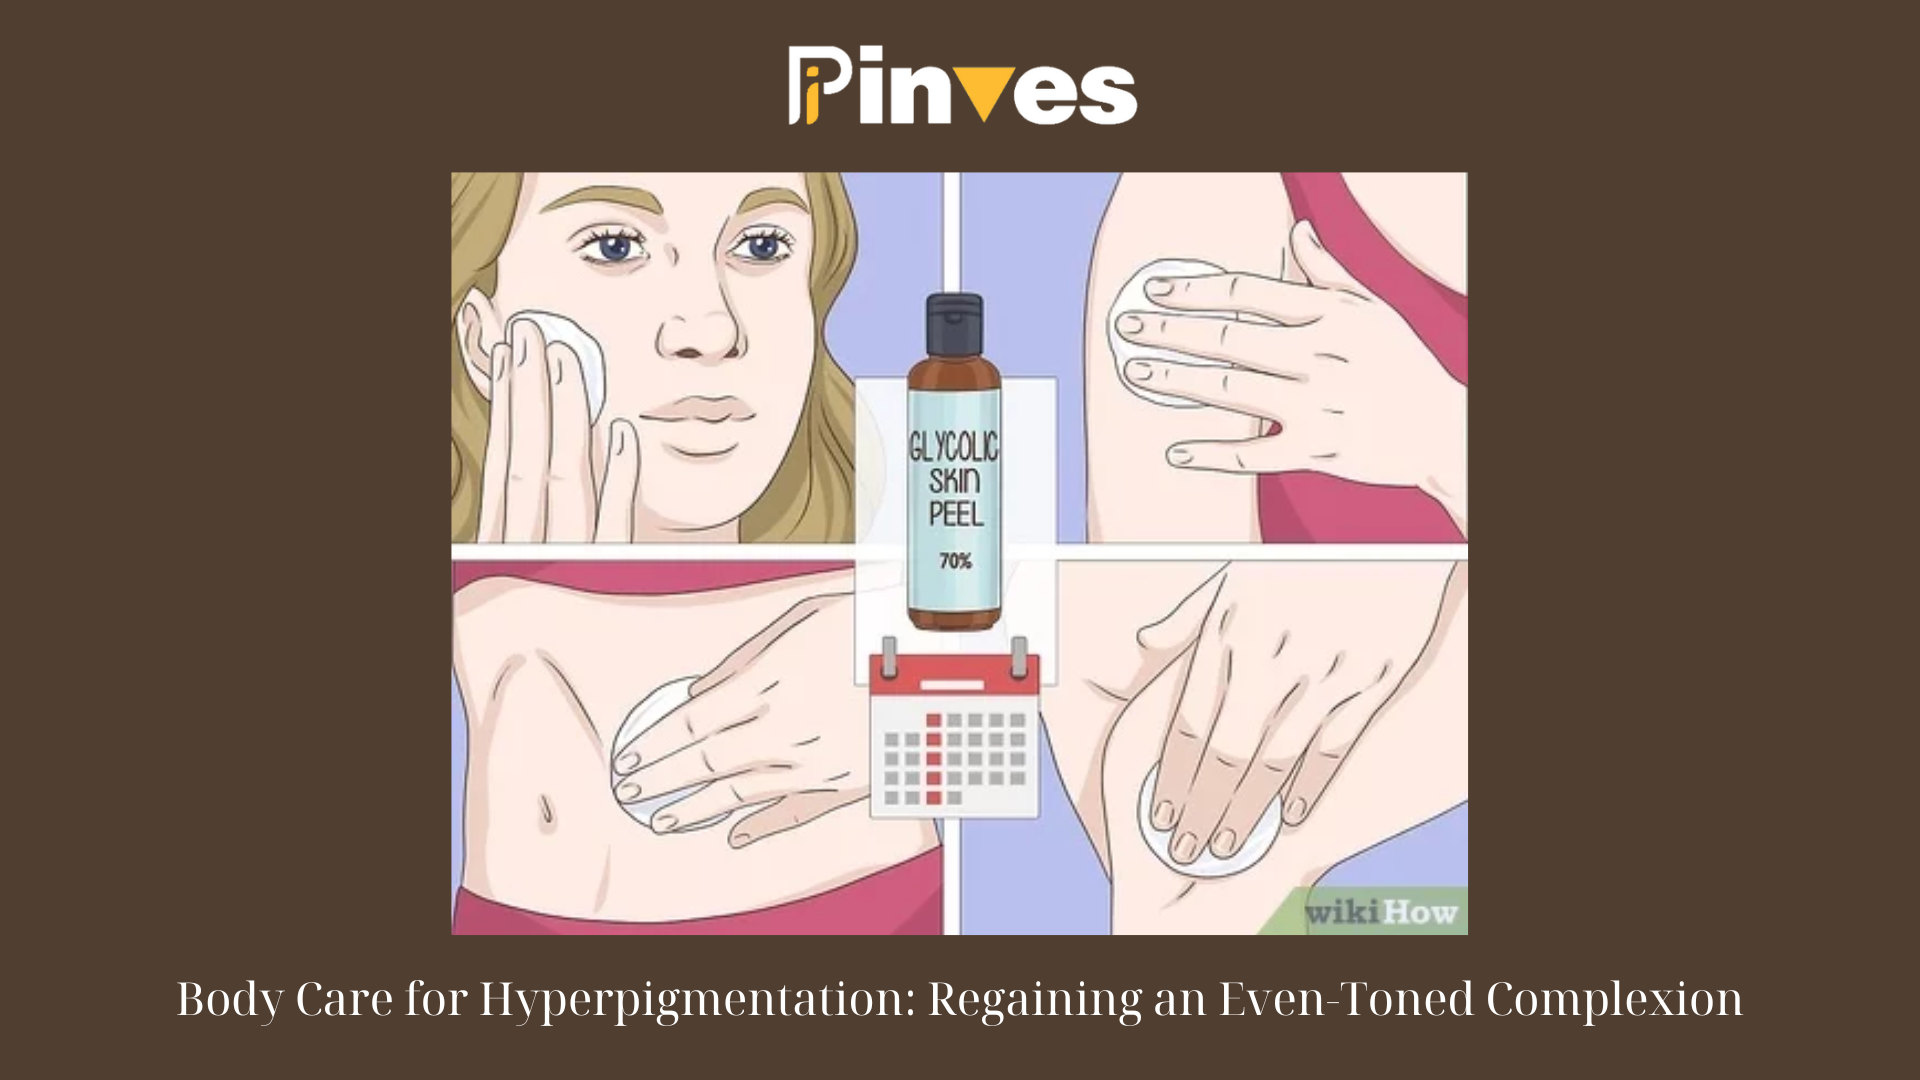 Body Care for Hyperpigmentation Regaining an Even-Toned Complexion